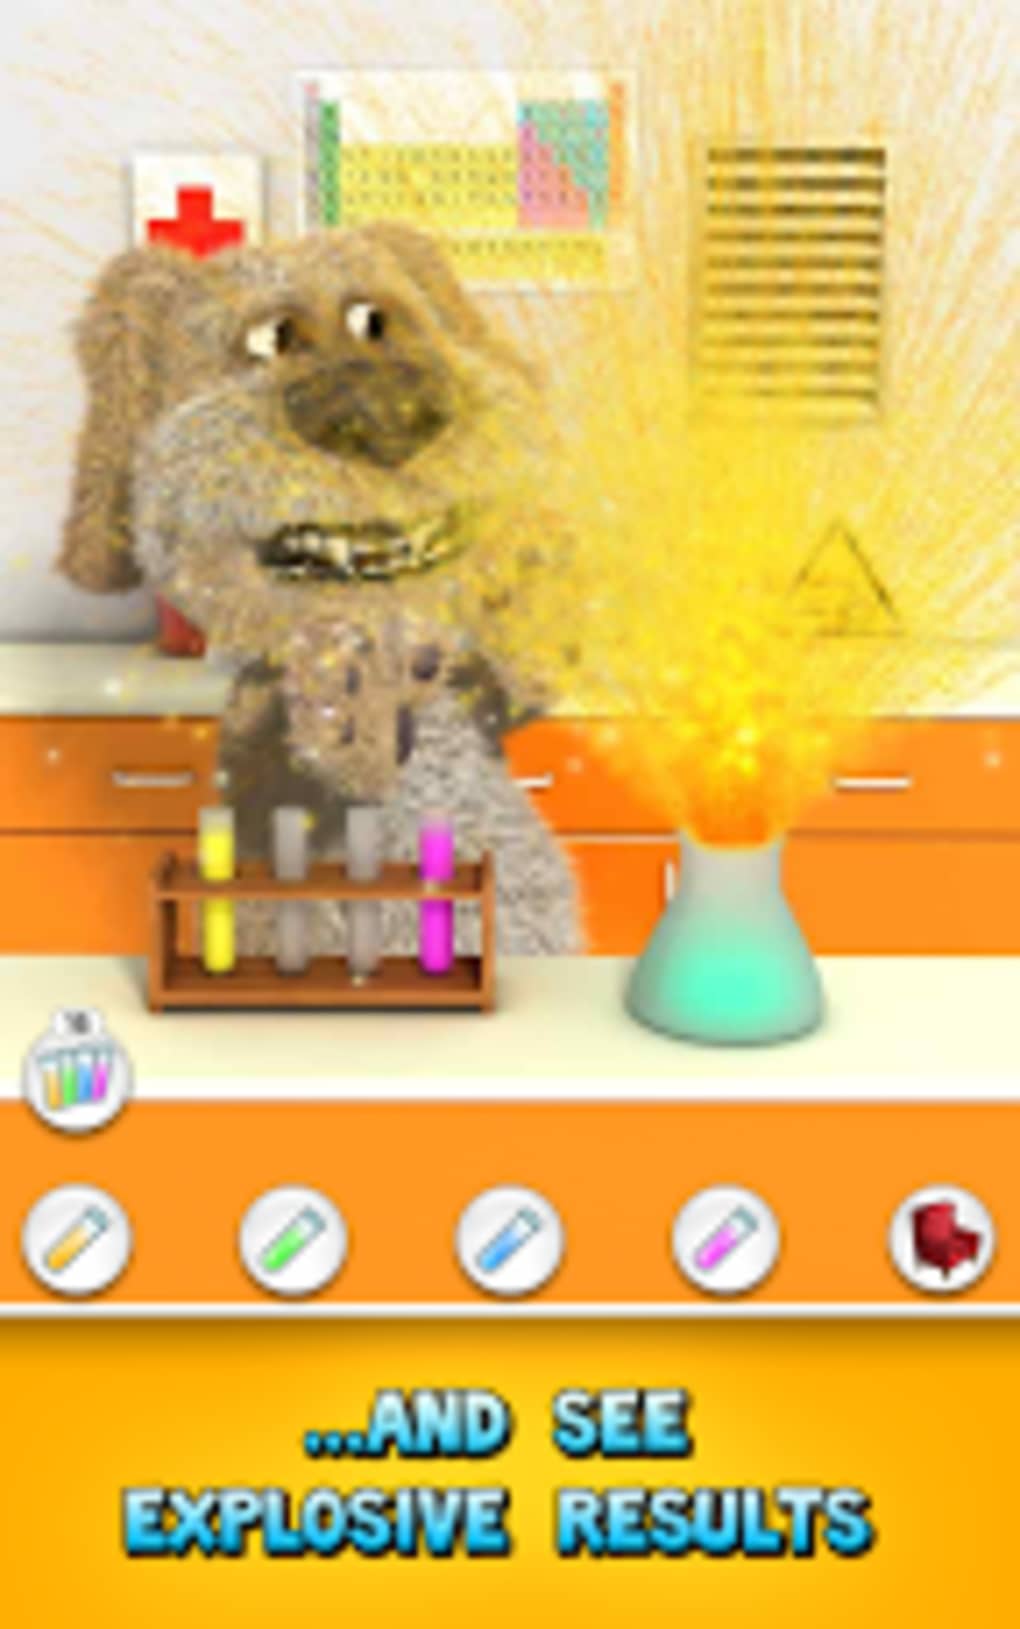 Talking Ben the Dog for Android - Download